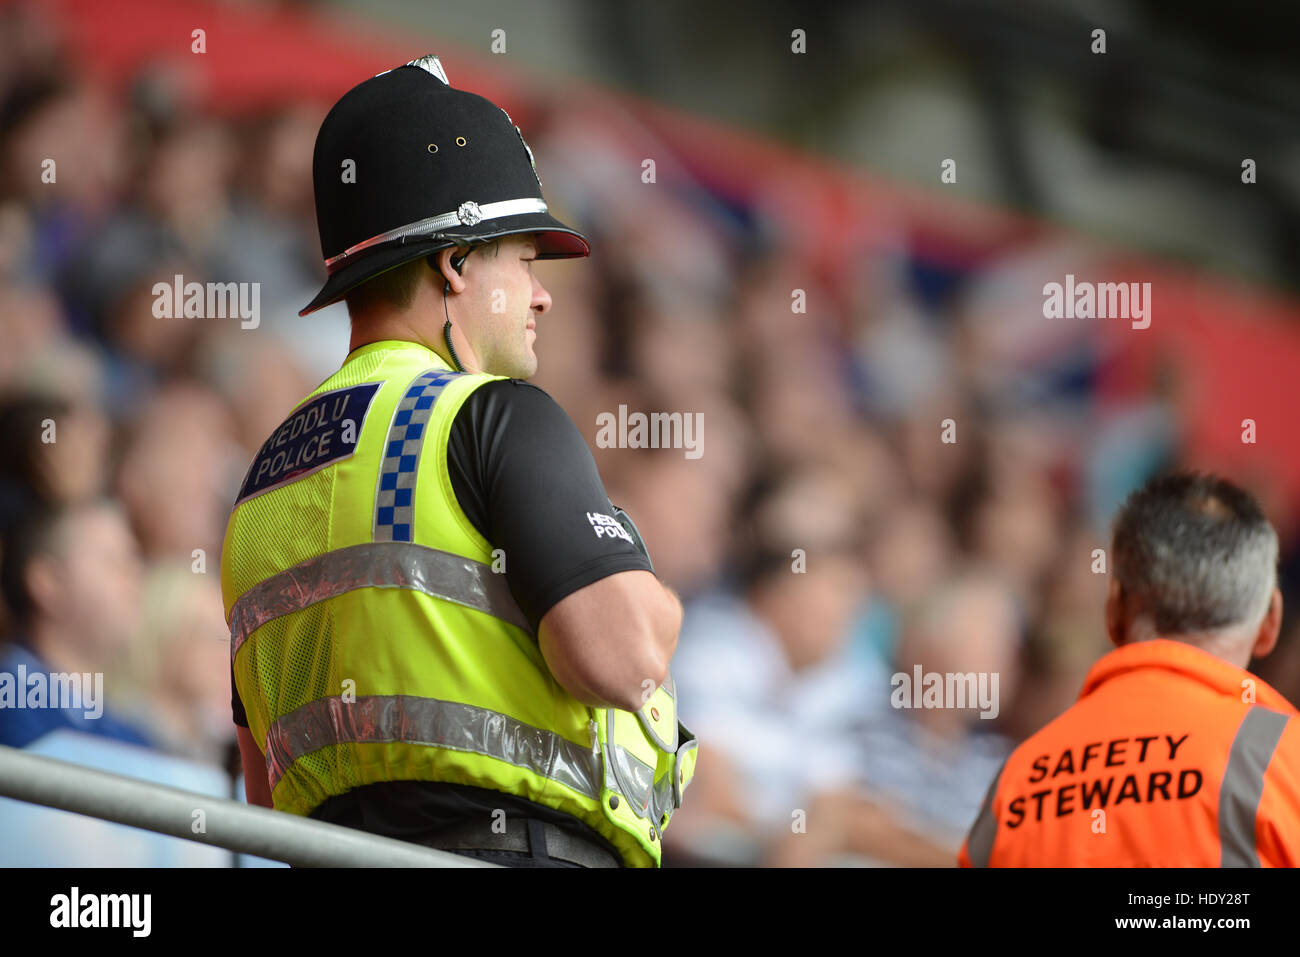 A UK police officer at a sporting event. Stock Photo